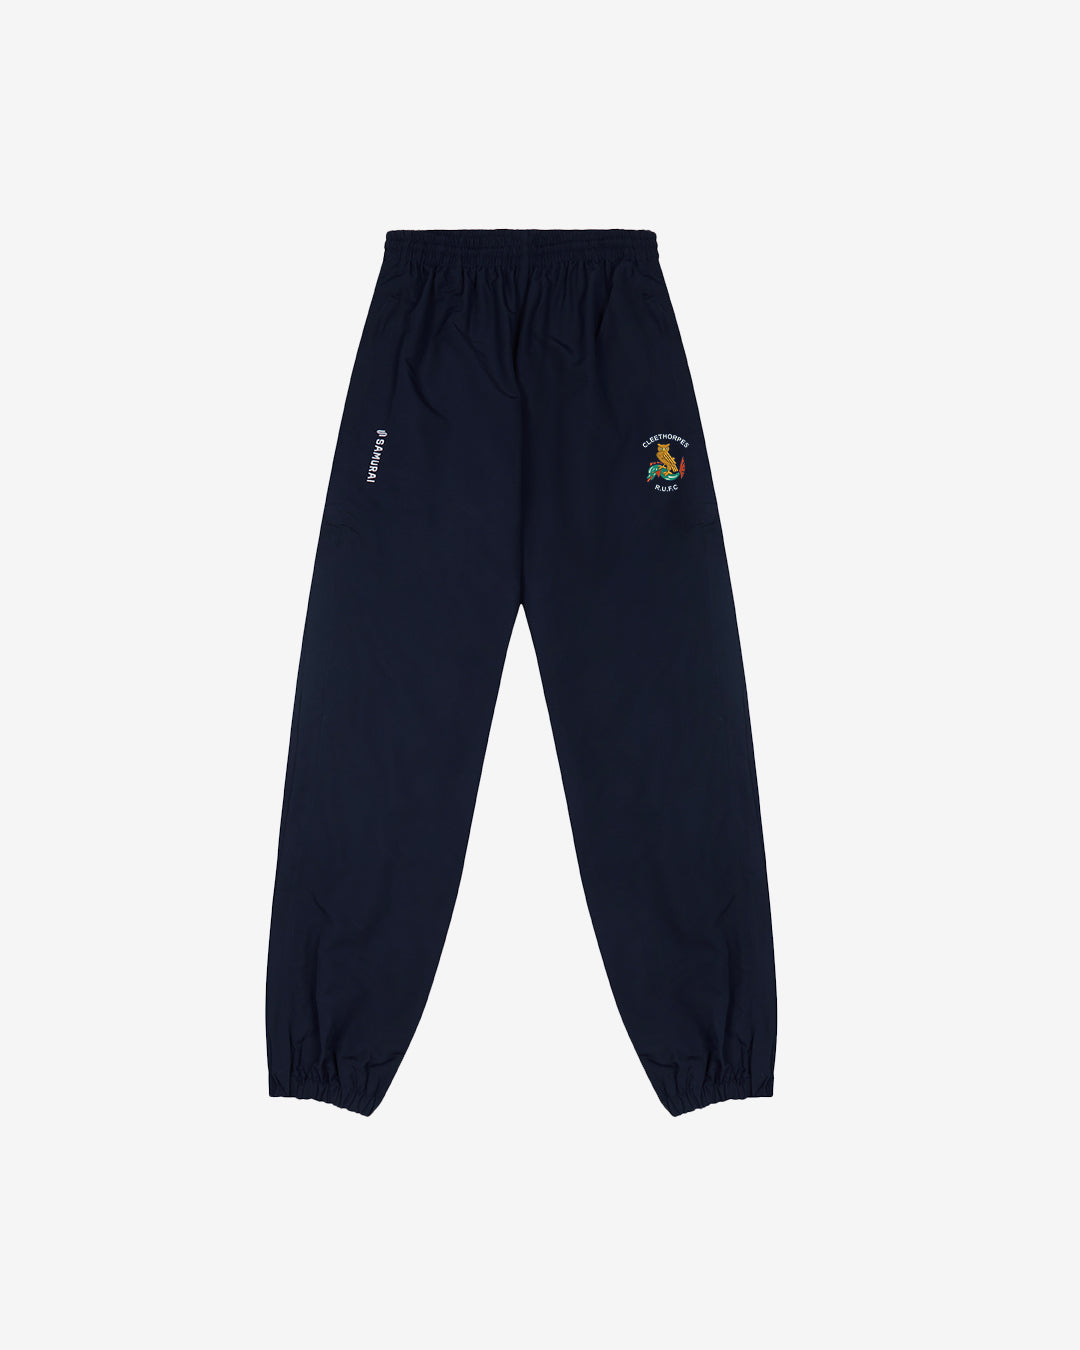 Cleethorpes RUFC - EP:0104 - Southland Track Pant 2.0 - Navy